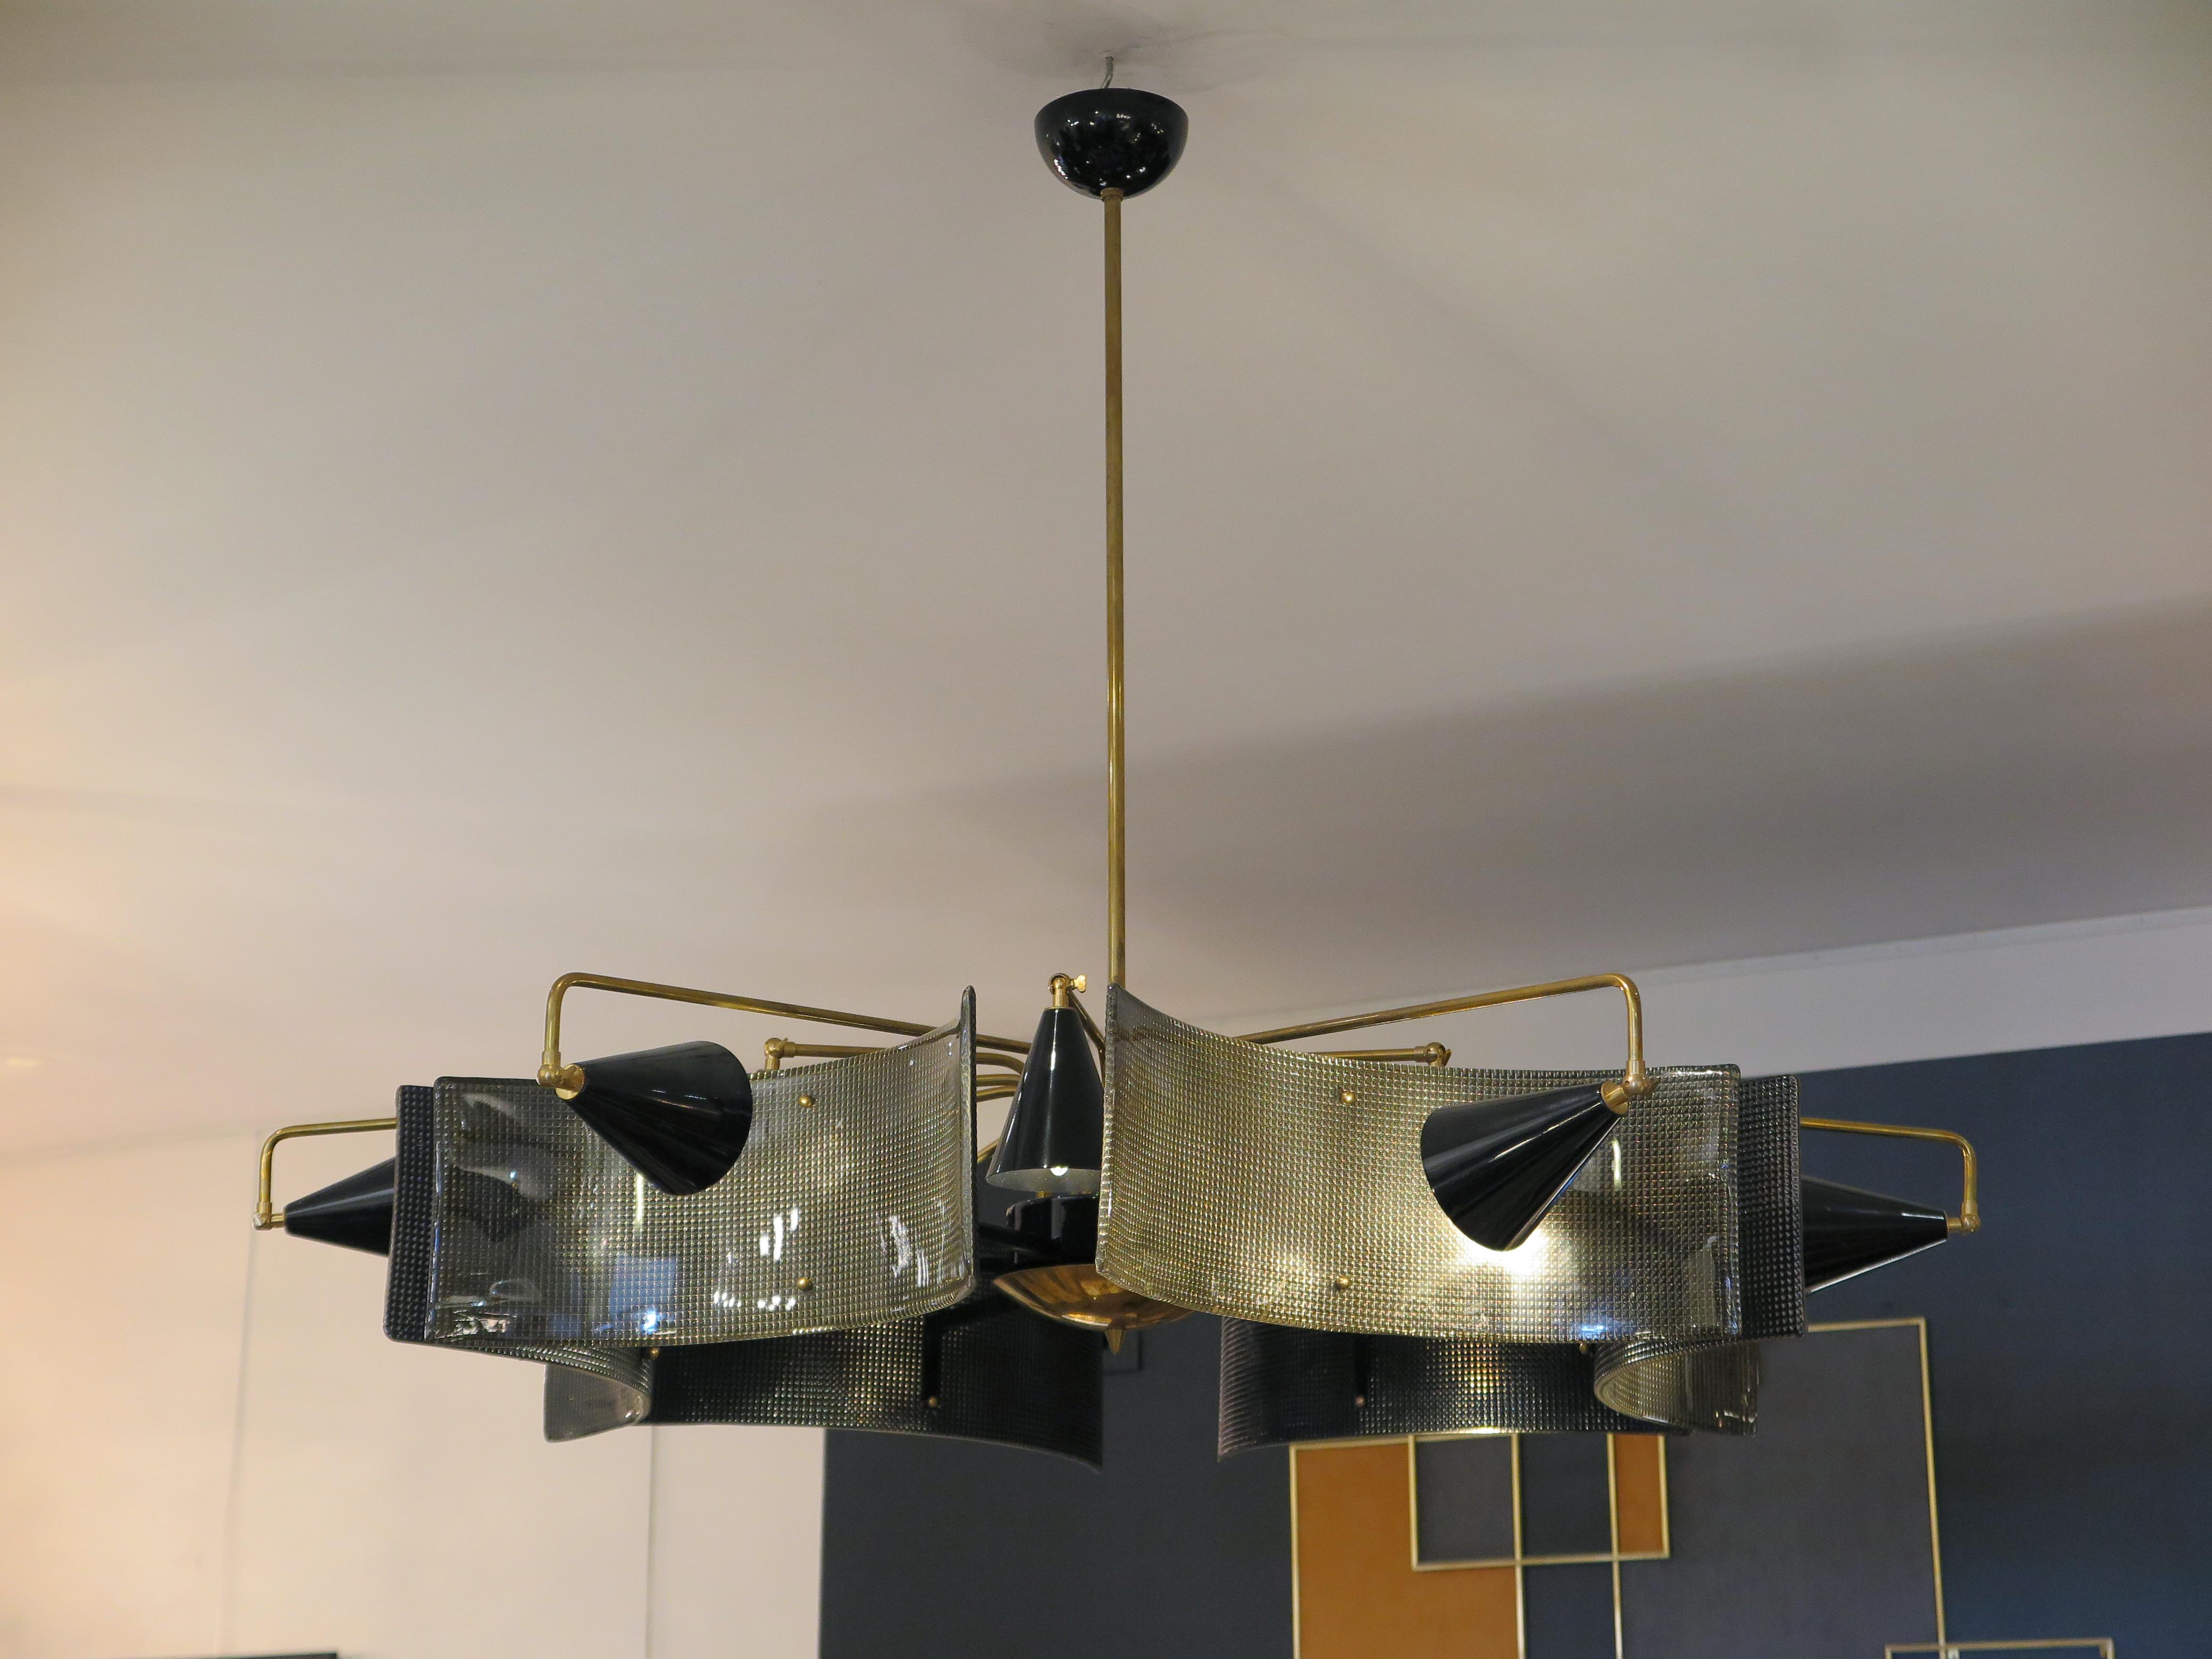 An edgy Mid-Century modern chandelier with curved and textured Murano glass panels. Black lacquer cone shades house the 12 bulbs surrounding the chandelier. Black lacquer arms support the Murano panels while brass arms support the lacquer shades. 

